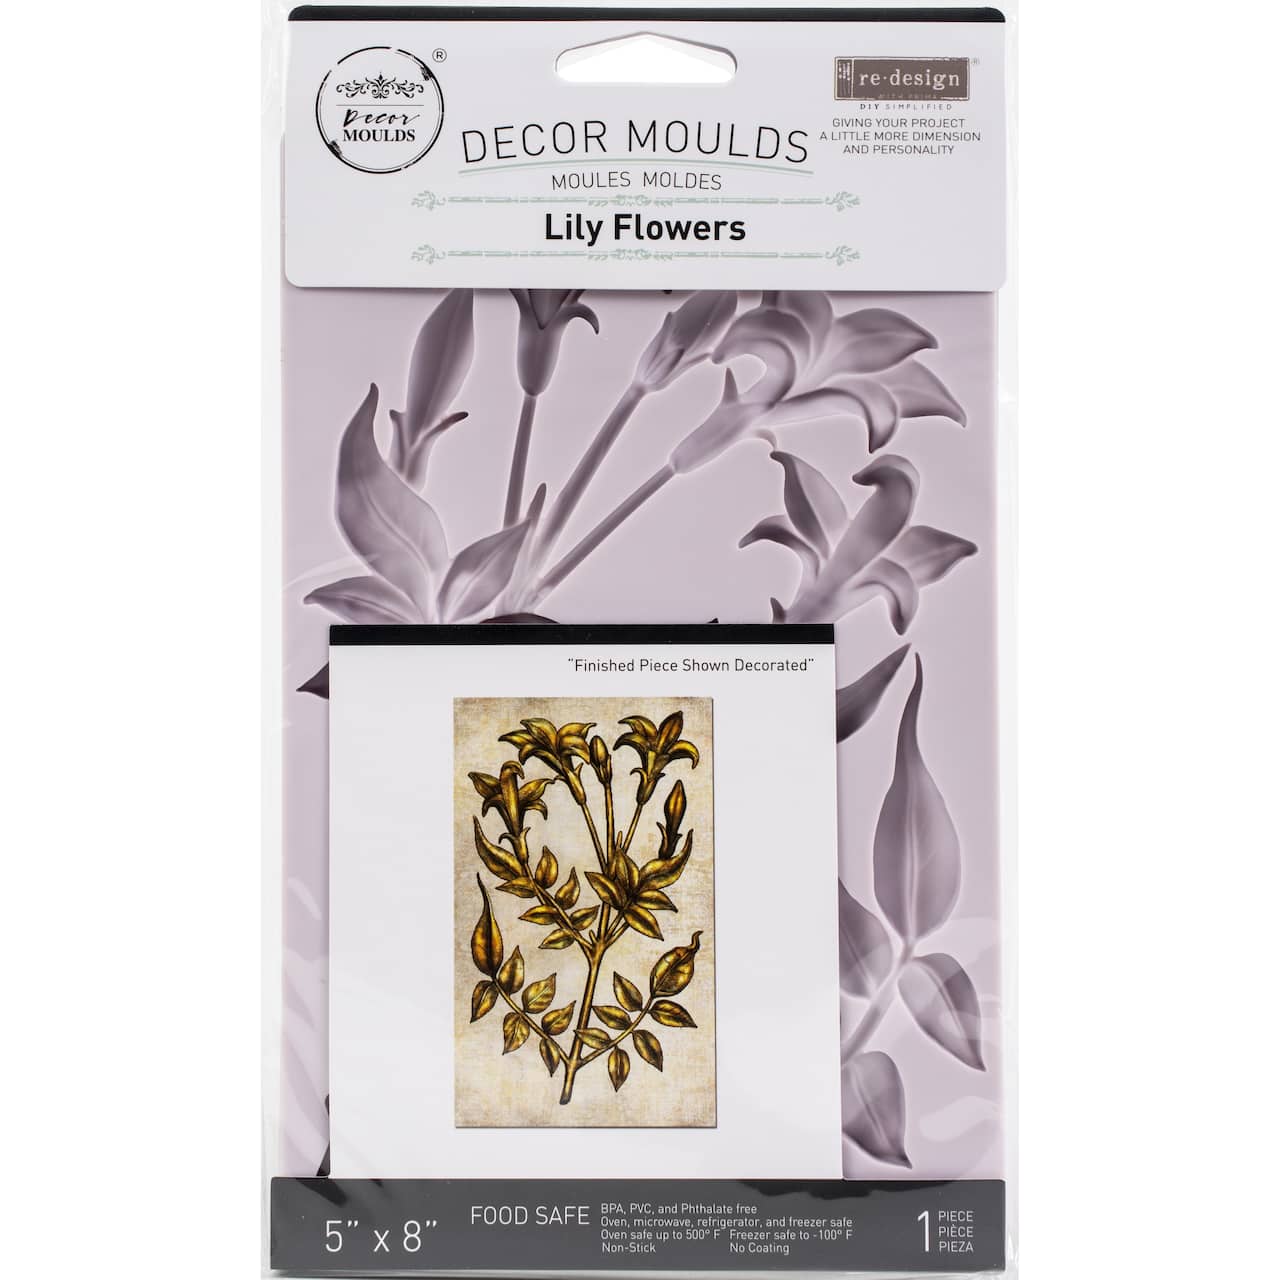 Redesign with Prima® Decor Mould® Lily Flowers Silicone Mold